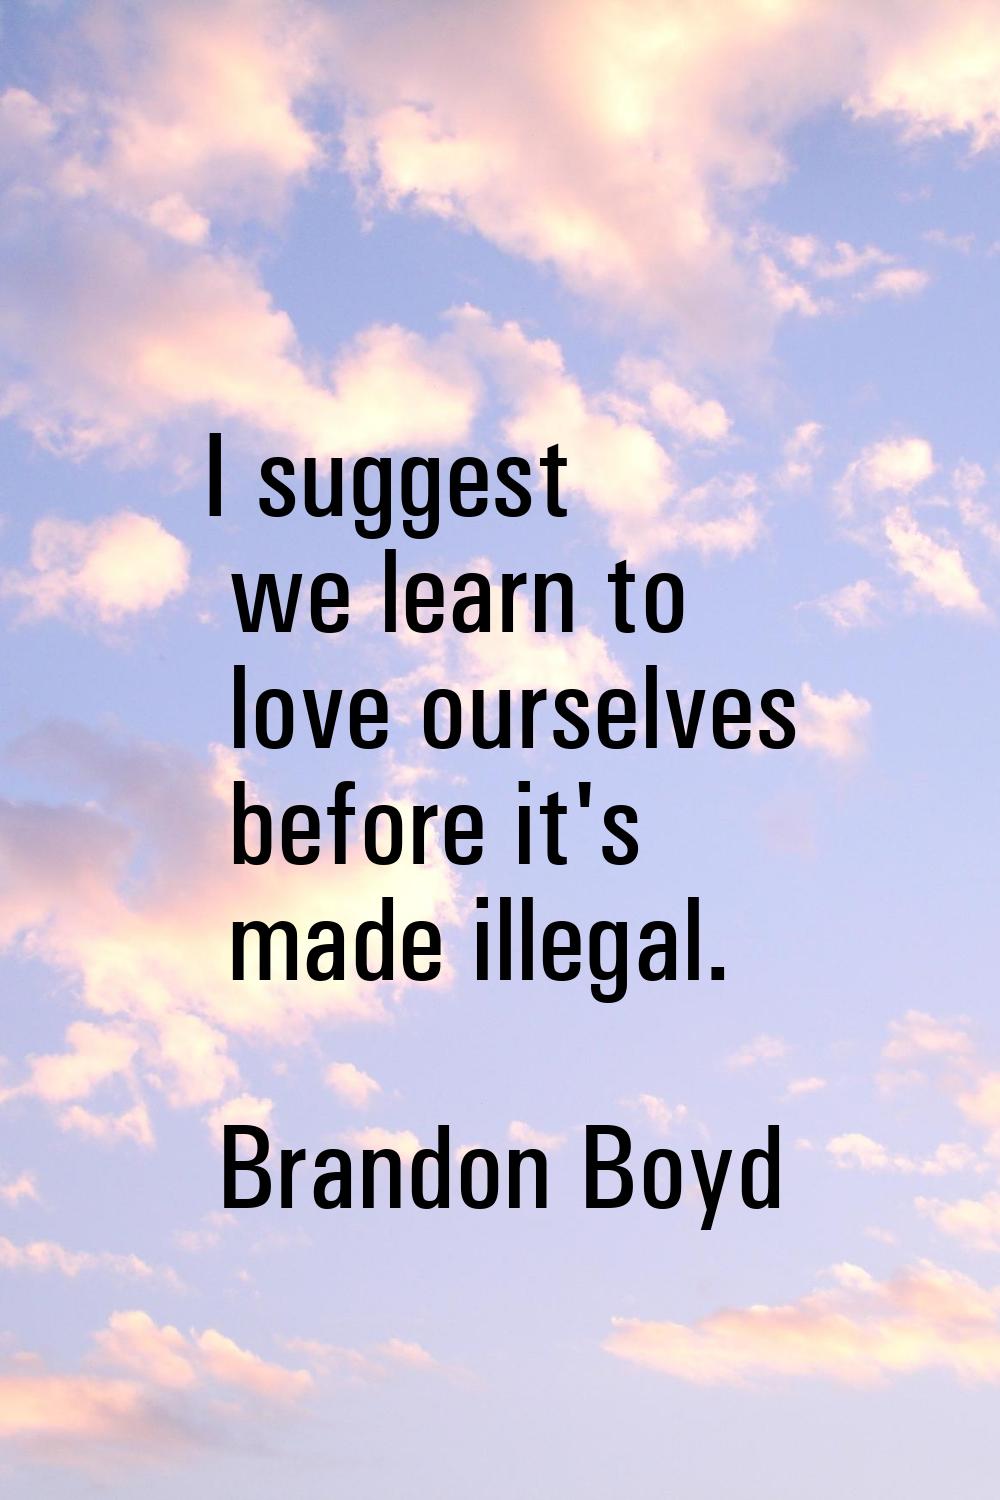 I suggest we learn to love ourselves before it's made illegal.